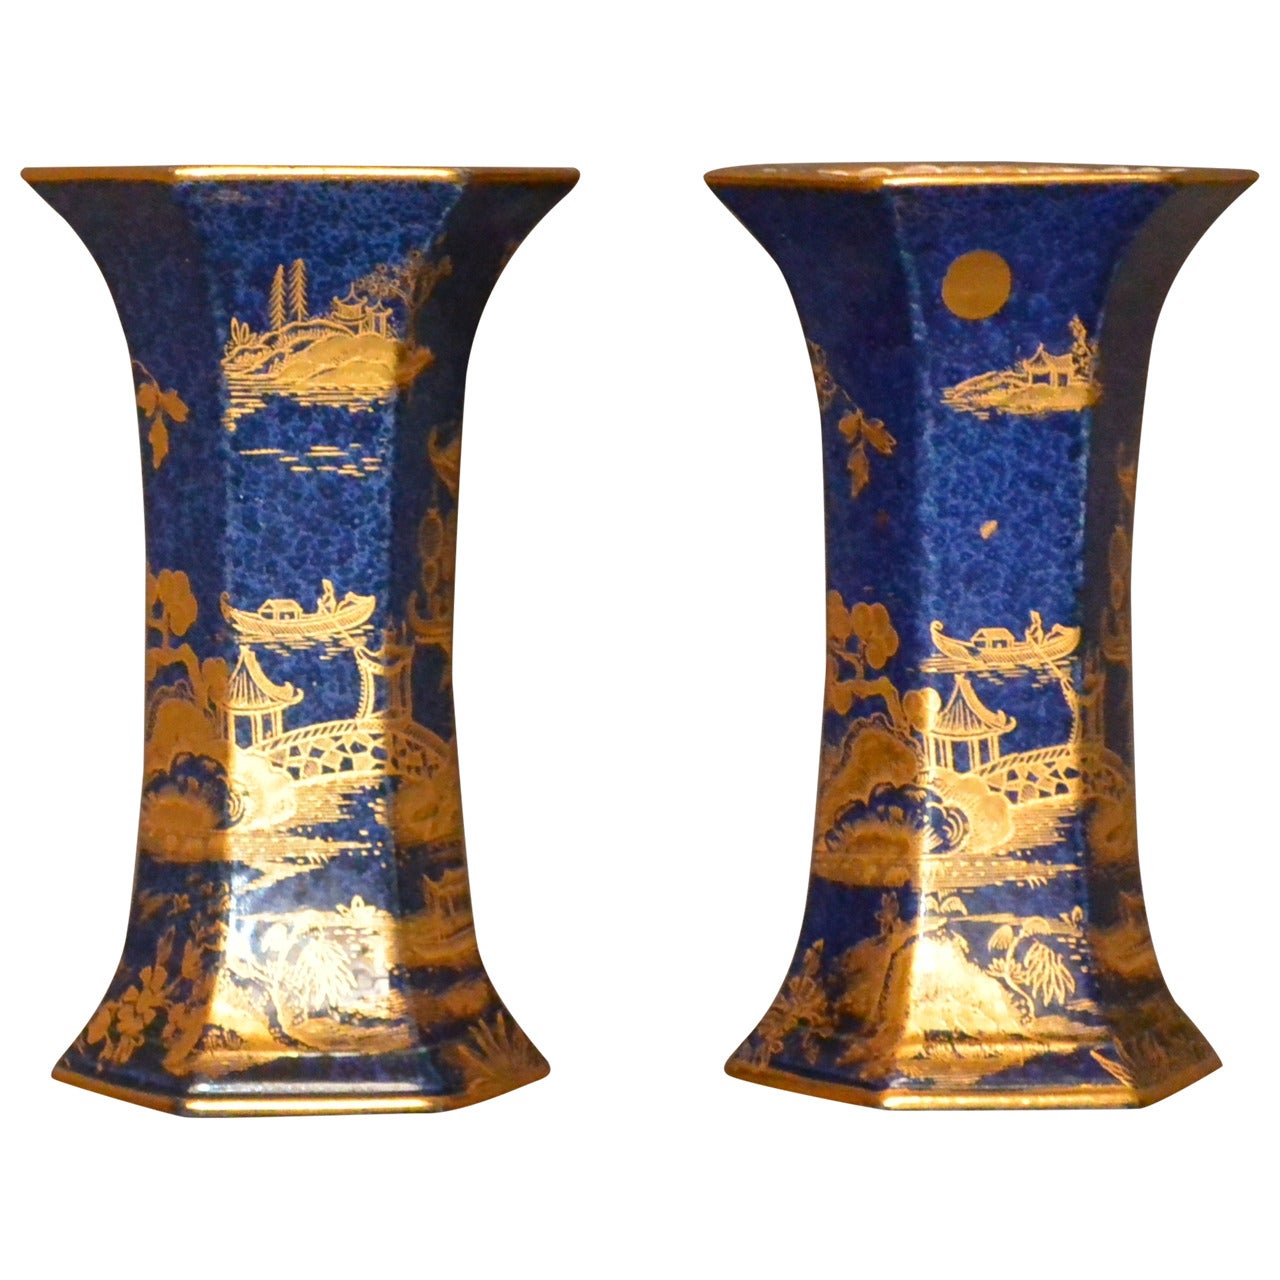 Pair of Hexagonal Chinoiserie Blue and Gold Vases